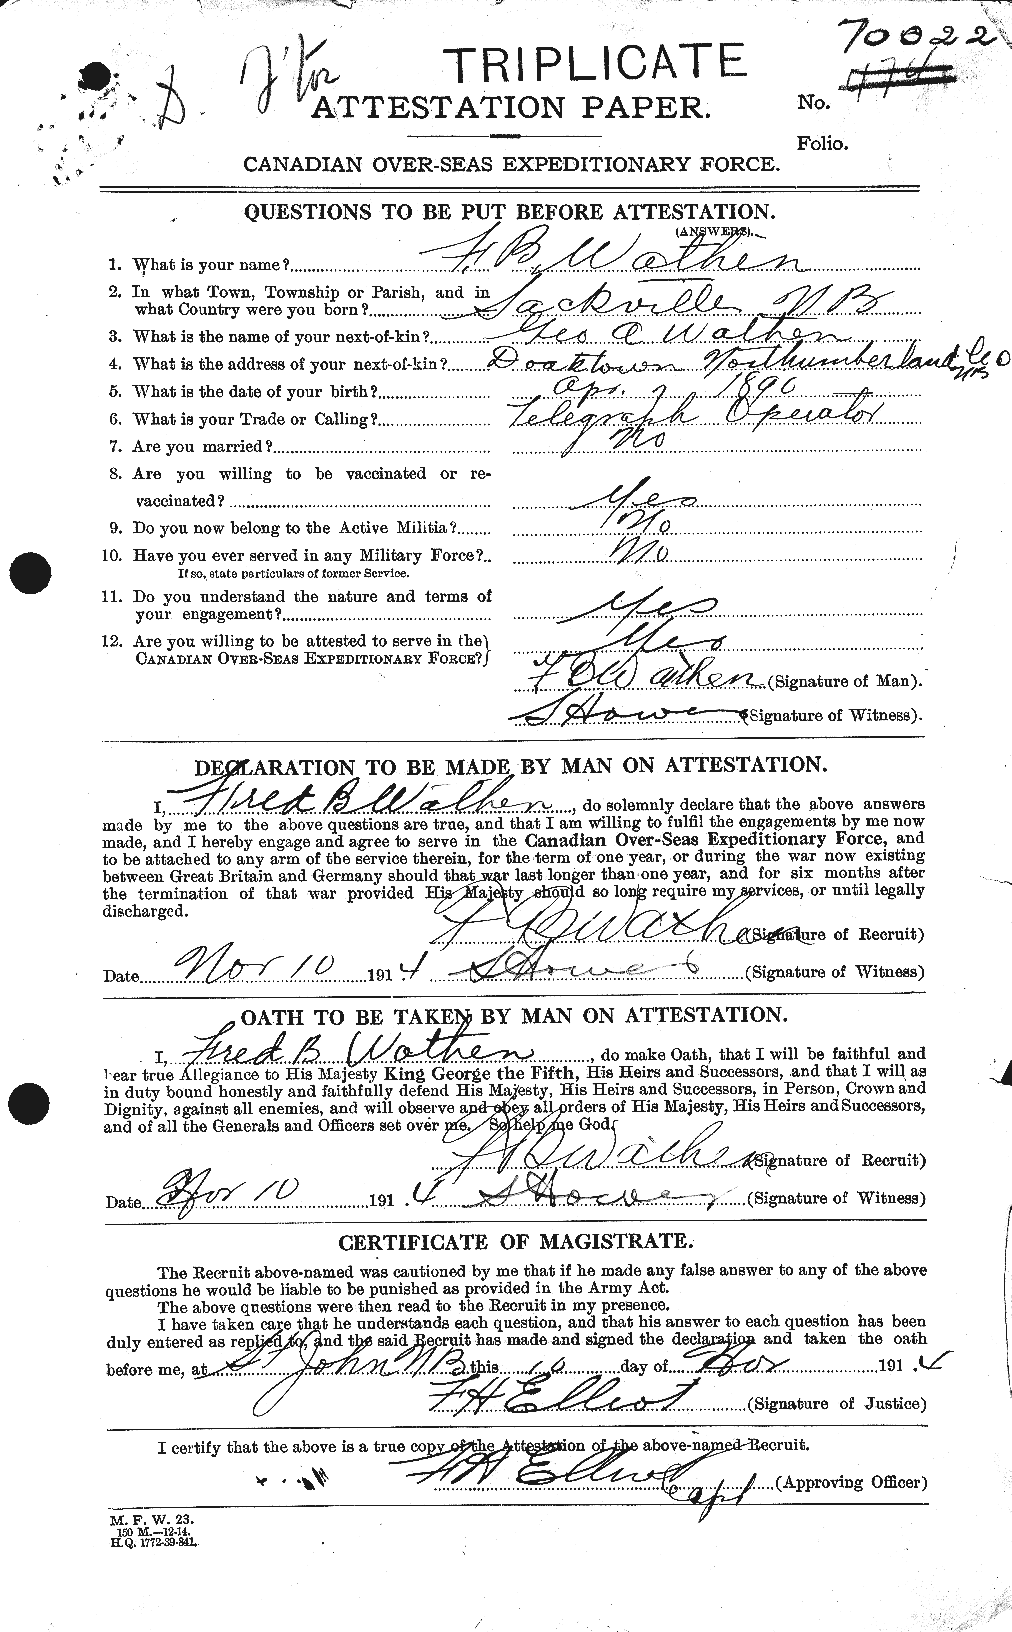 Personnel Records of the First World War - CEF 659117a